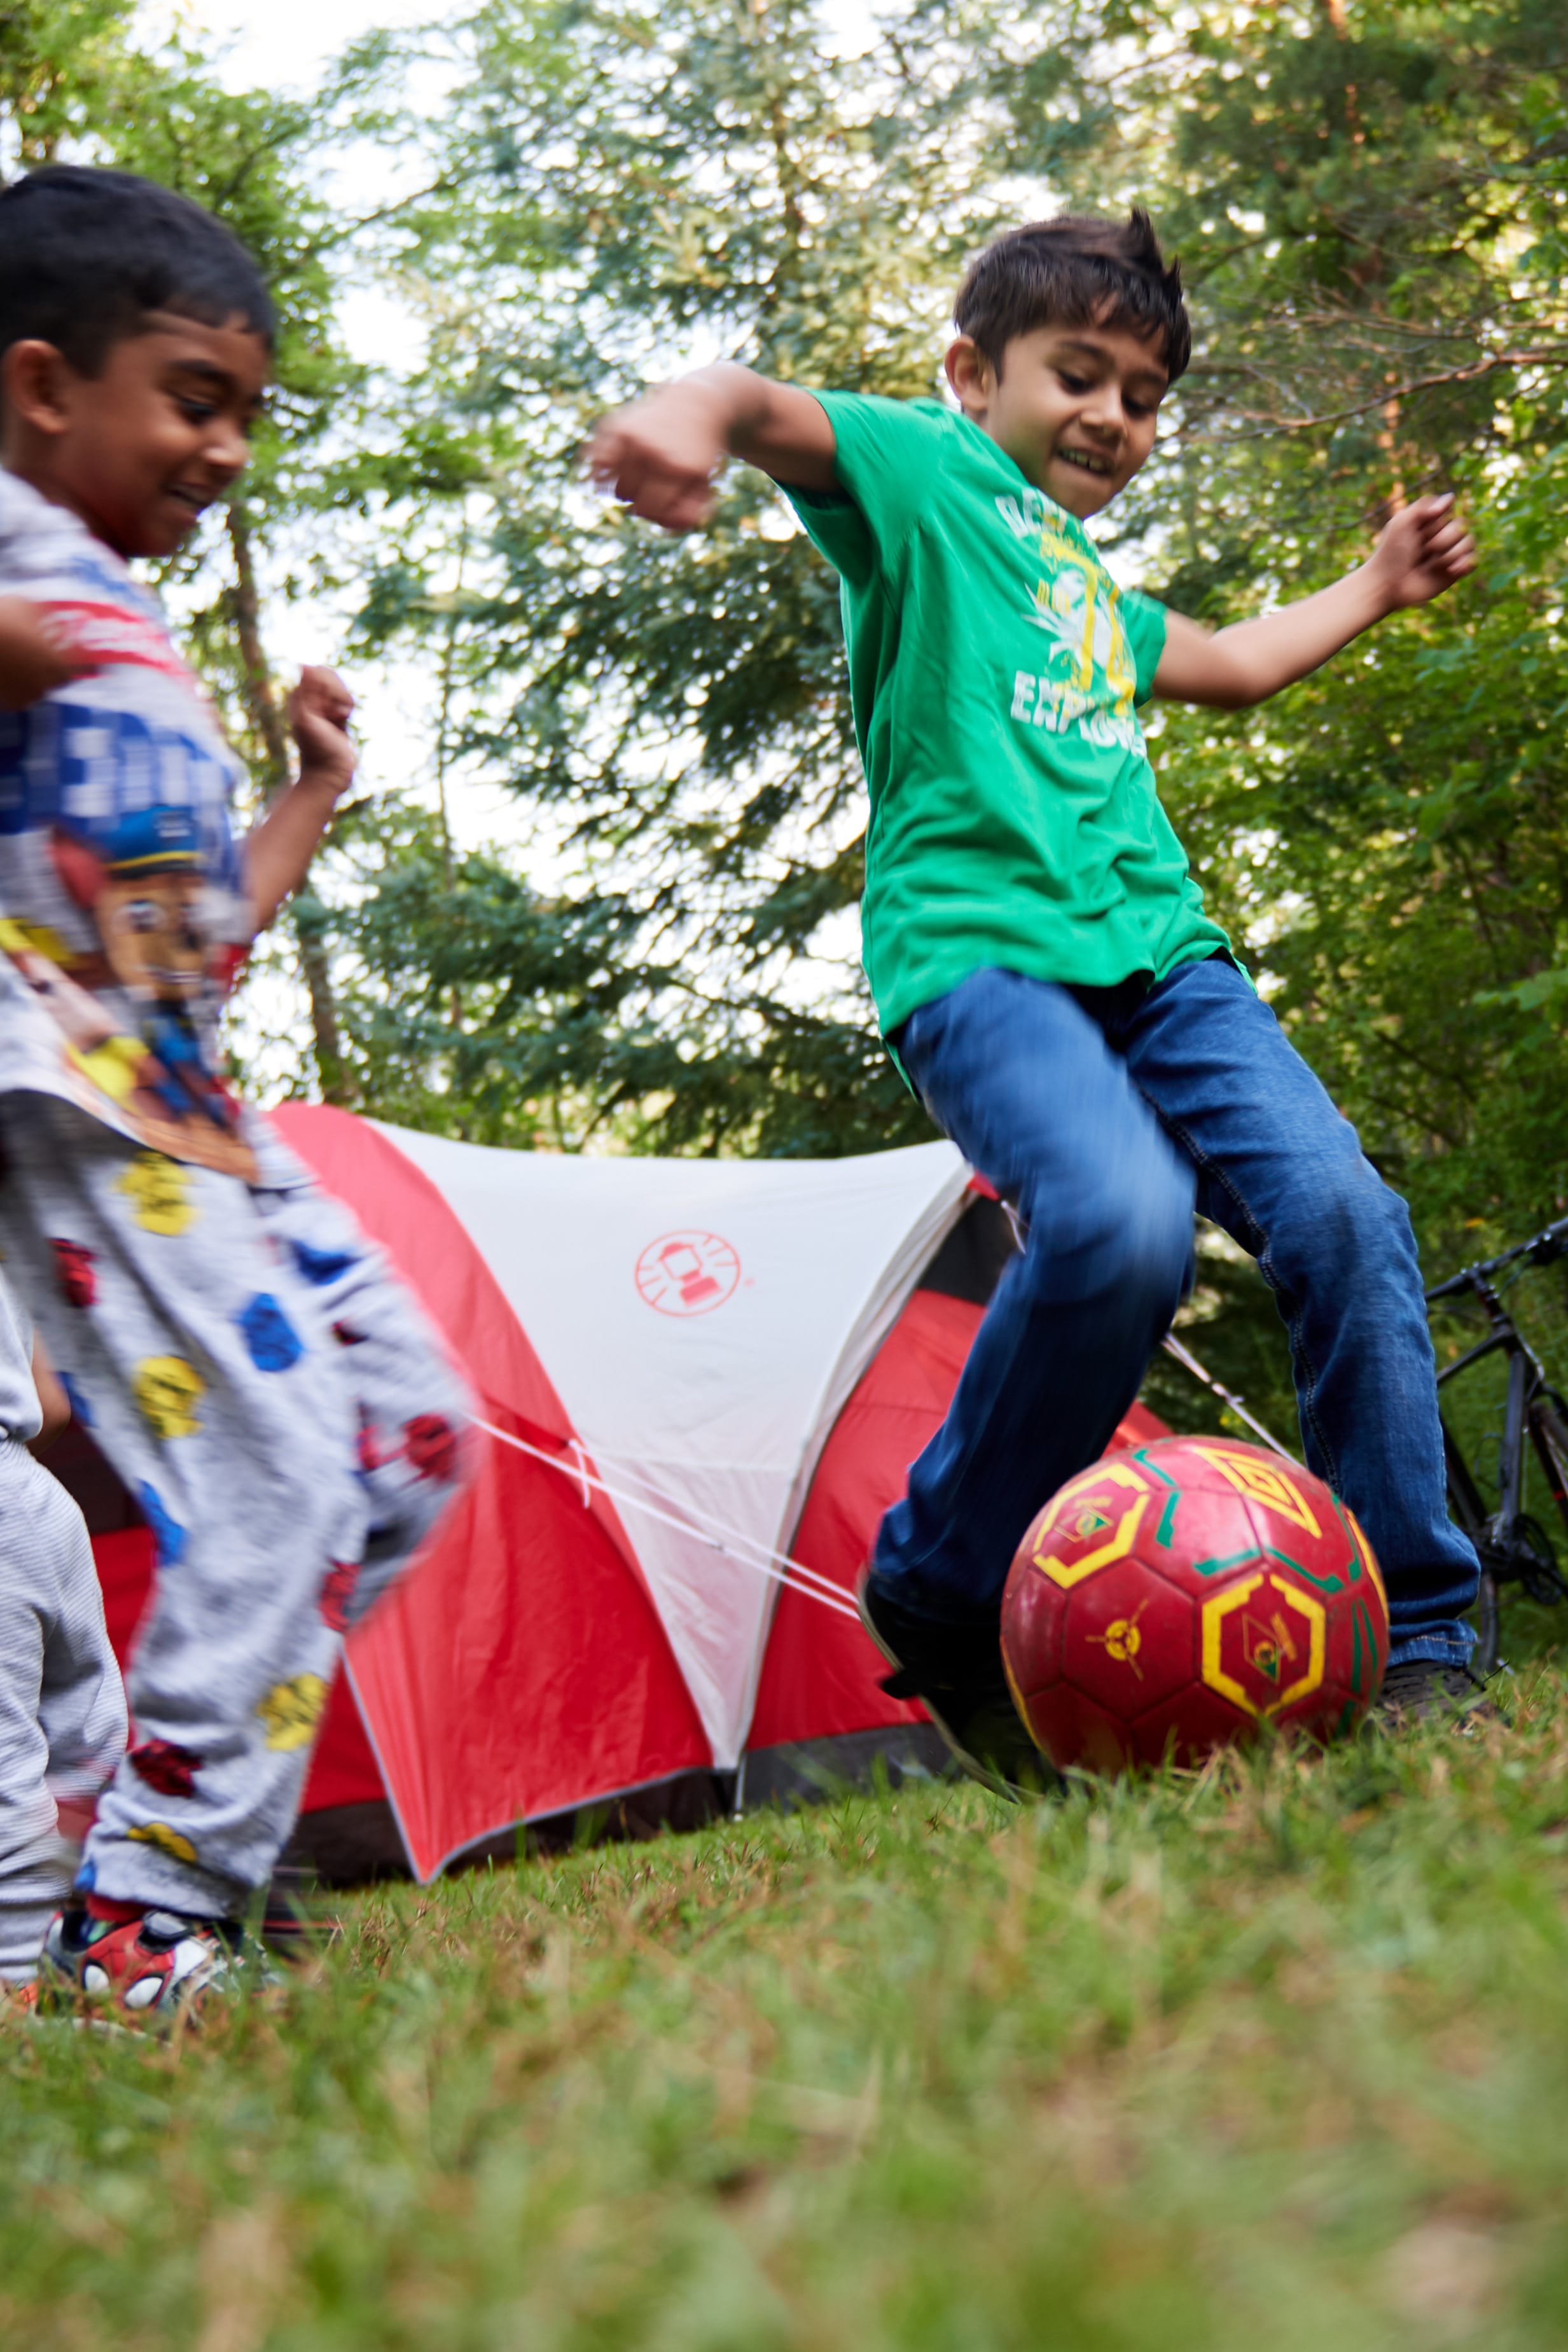 Two young kids play with a soccer ball while camping.